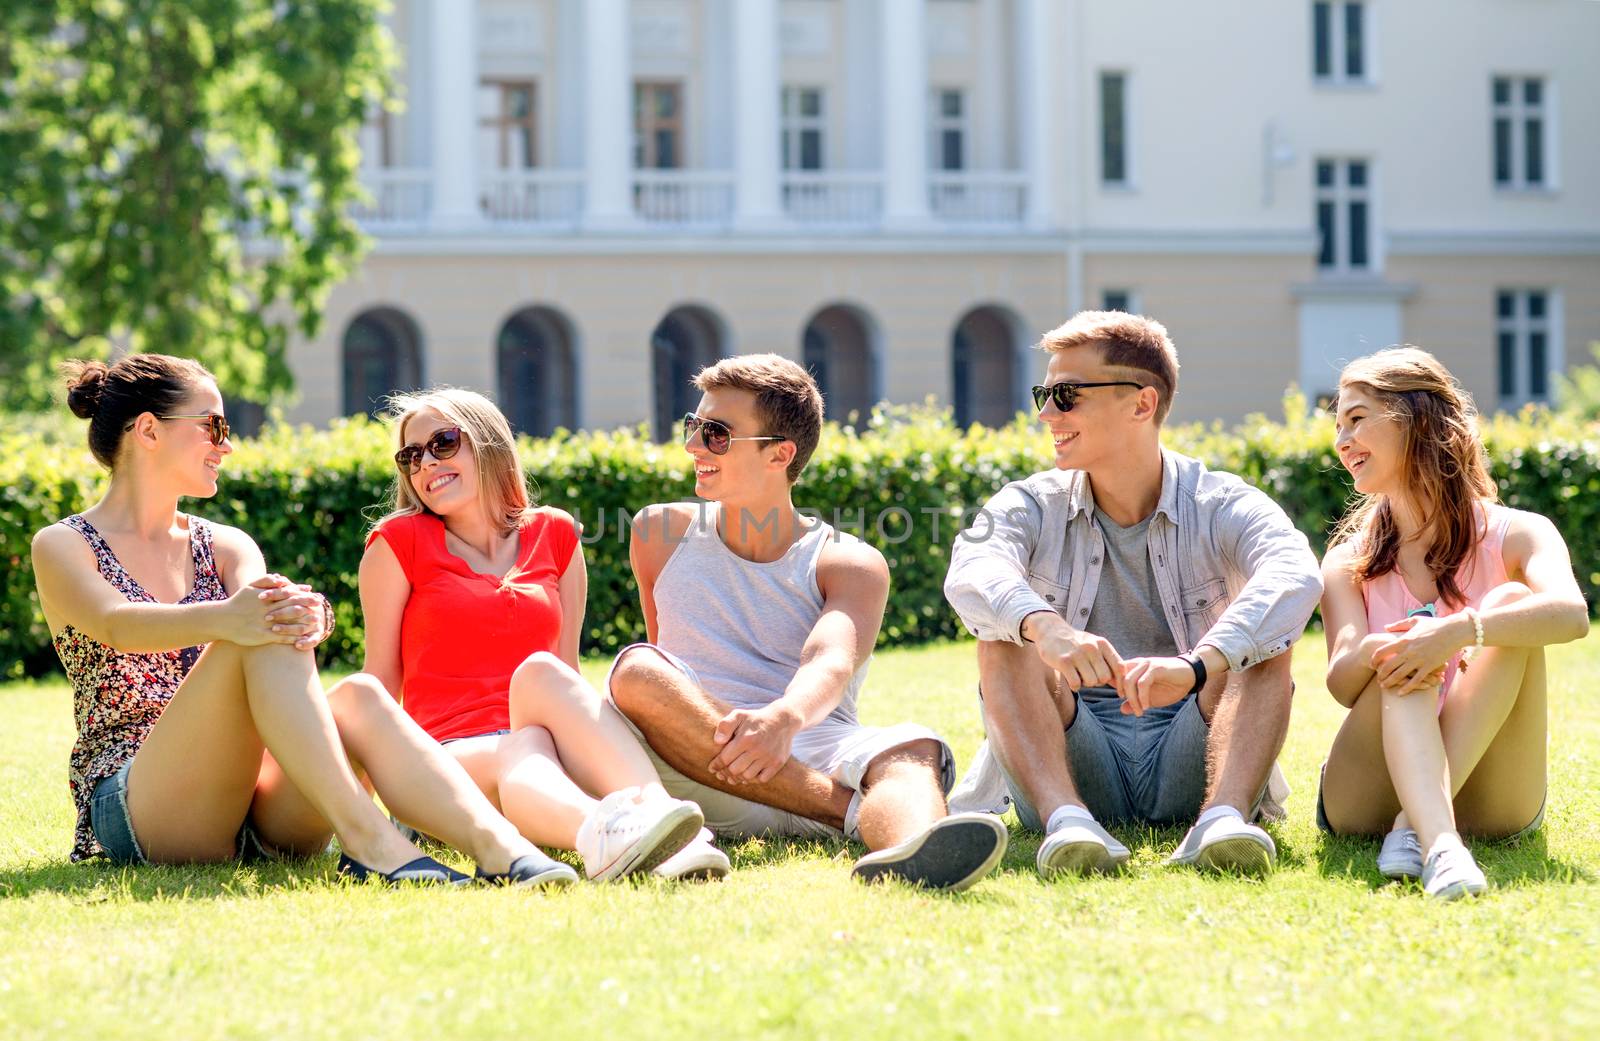 group of smiling friends outdoors sitting on grass by dolgachov